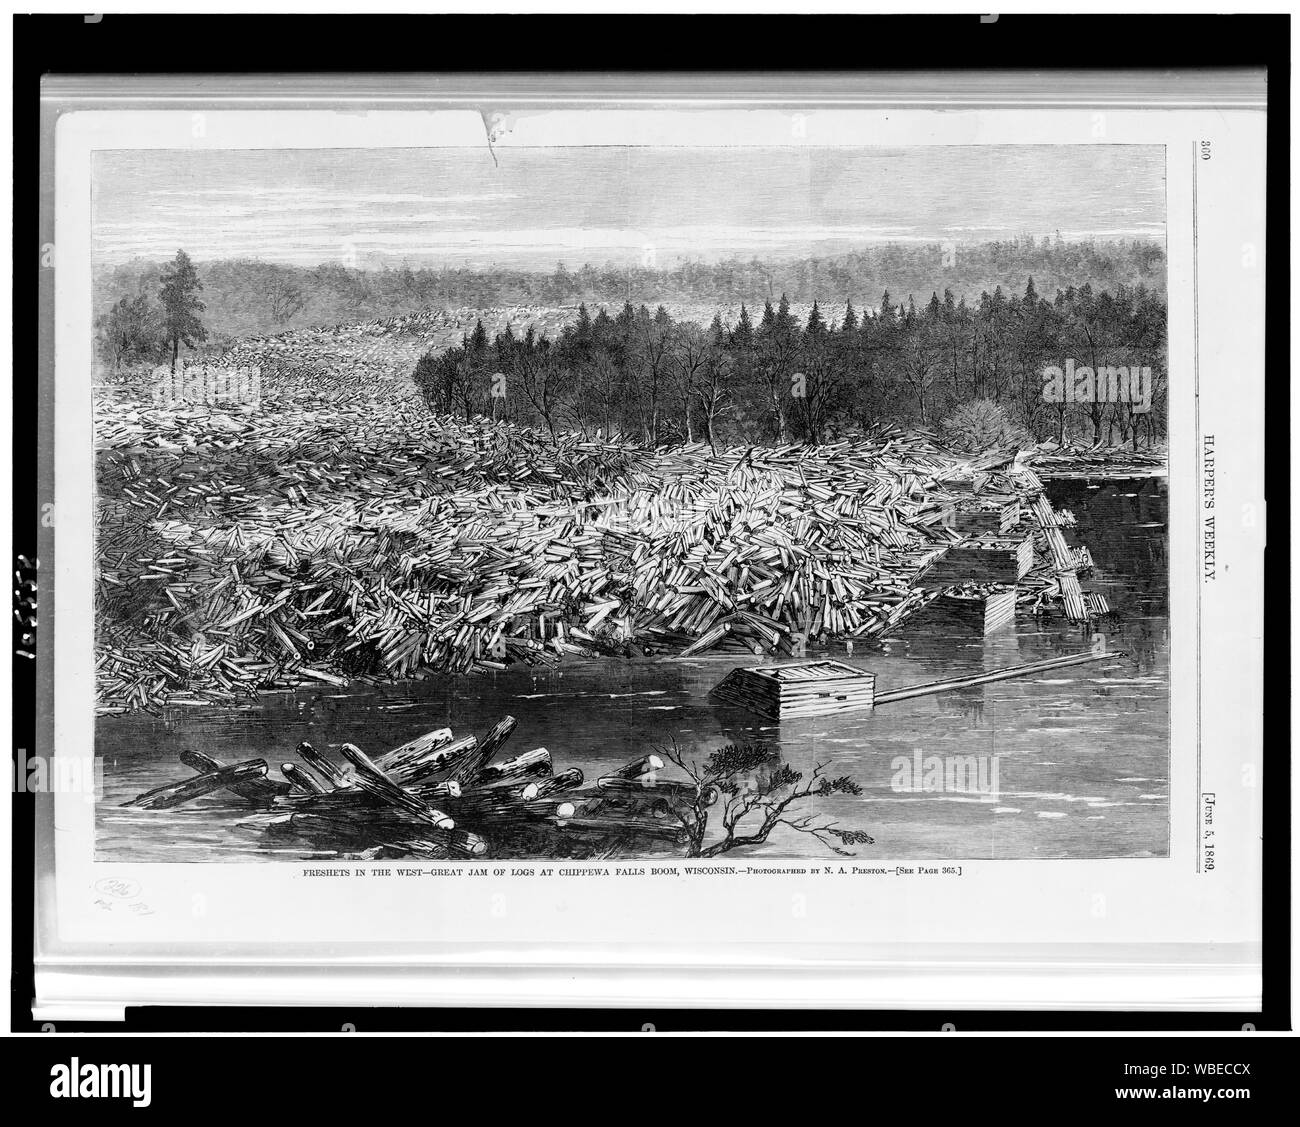 Freshets in the West--great jam of logs at Chippewa Falls boom, Wisconsin / Photographed by N.A. Preston. Abstract/medium: 1 print : wood engraving. Stock Photo